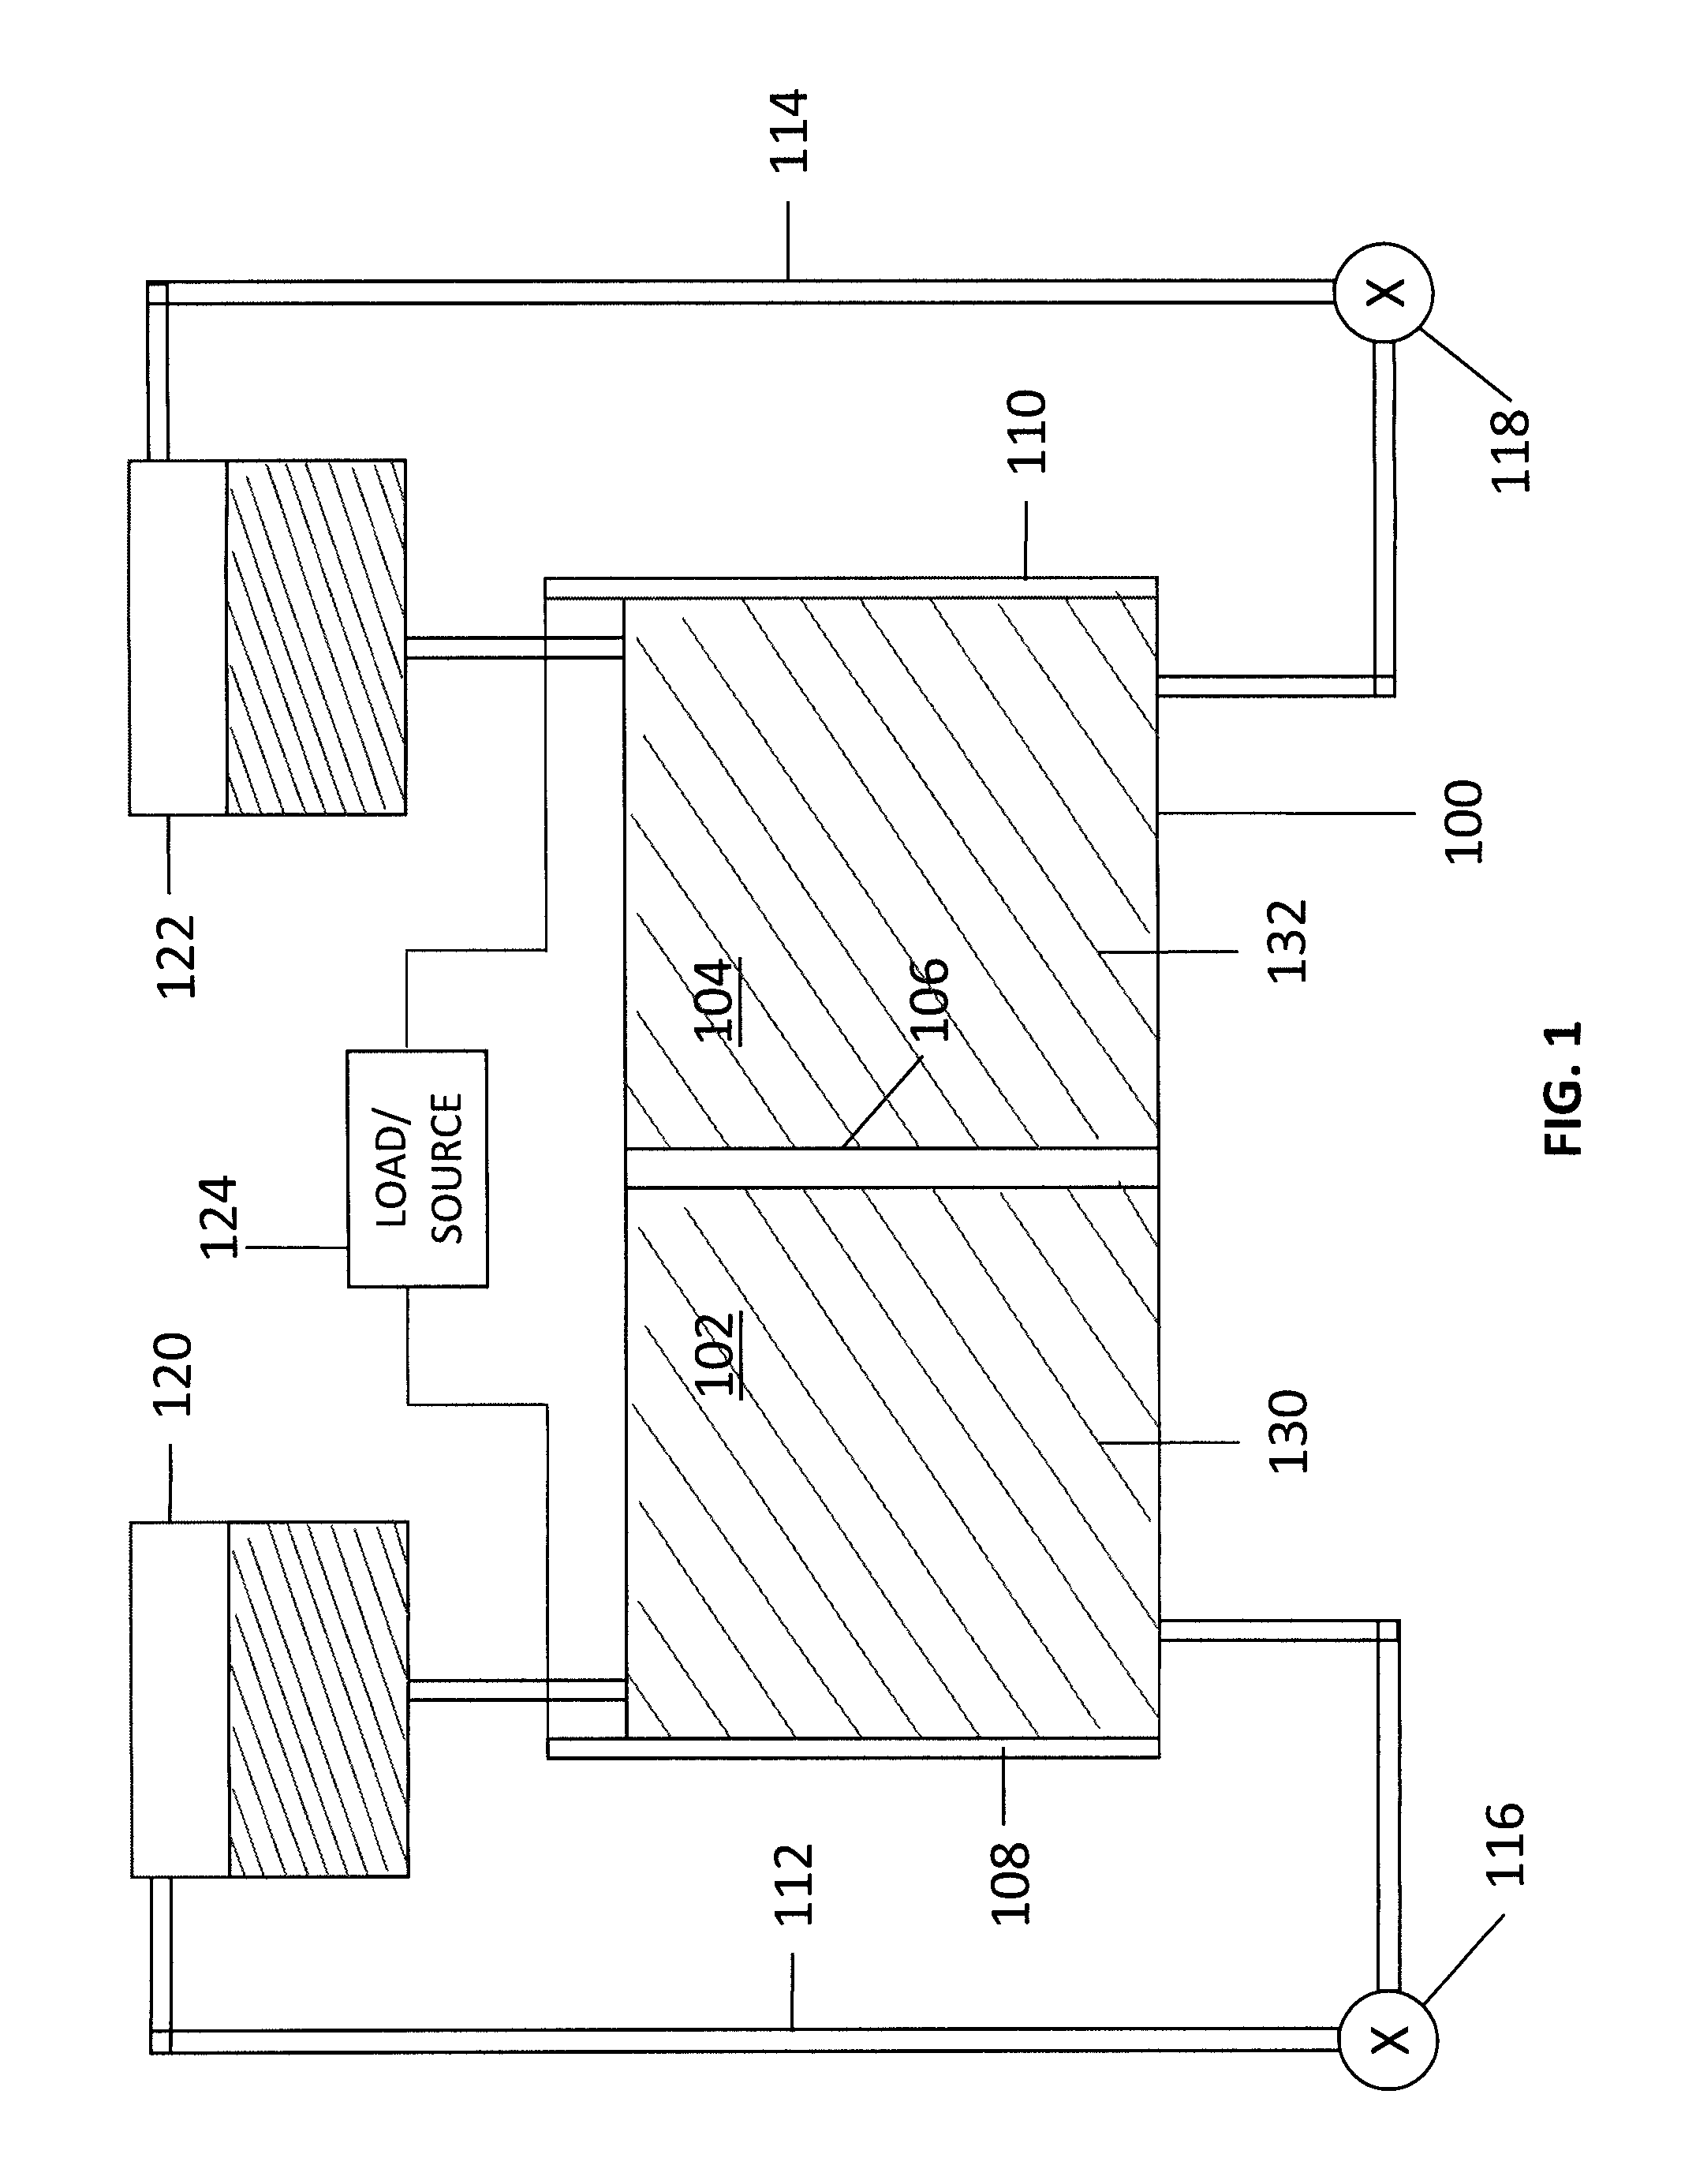 Thermal Control of a Flow Cell Battery